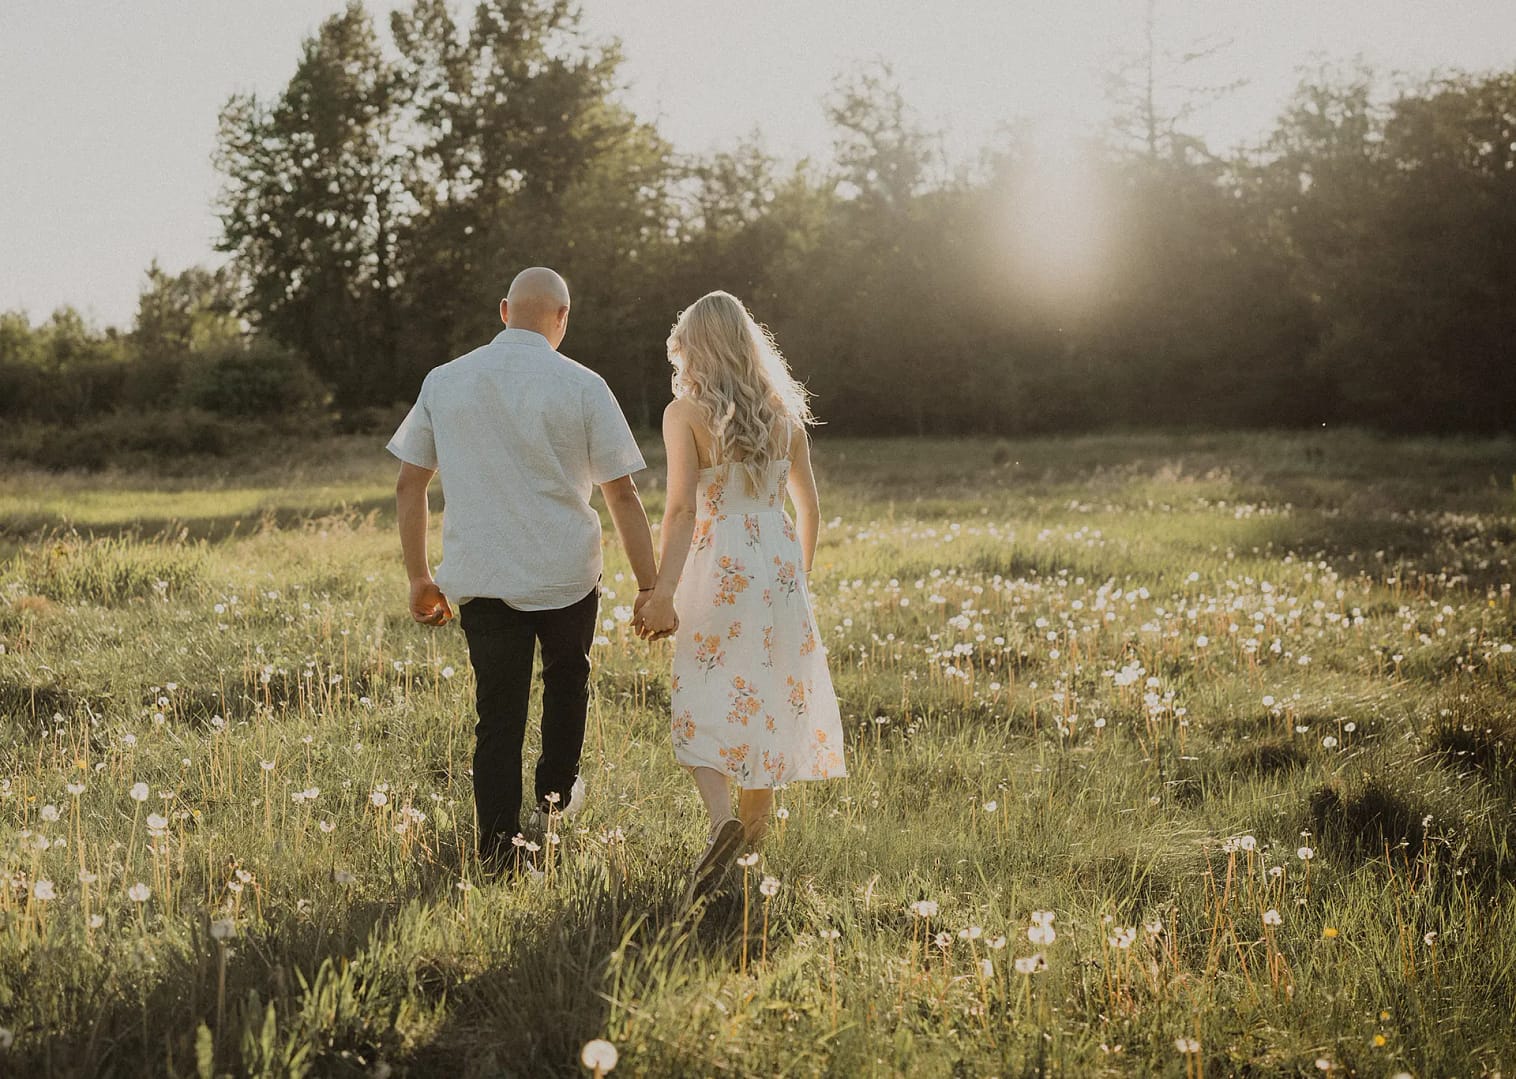 Couple holding hands walking through a field